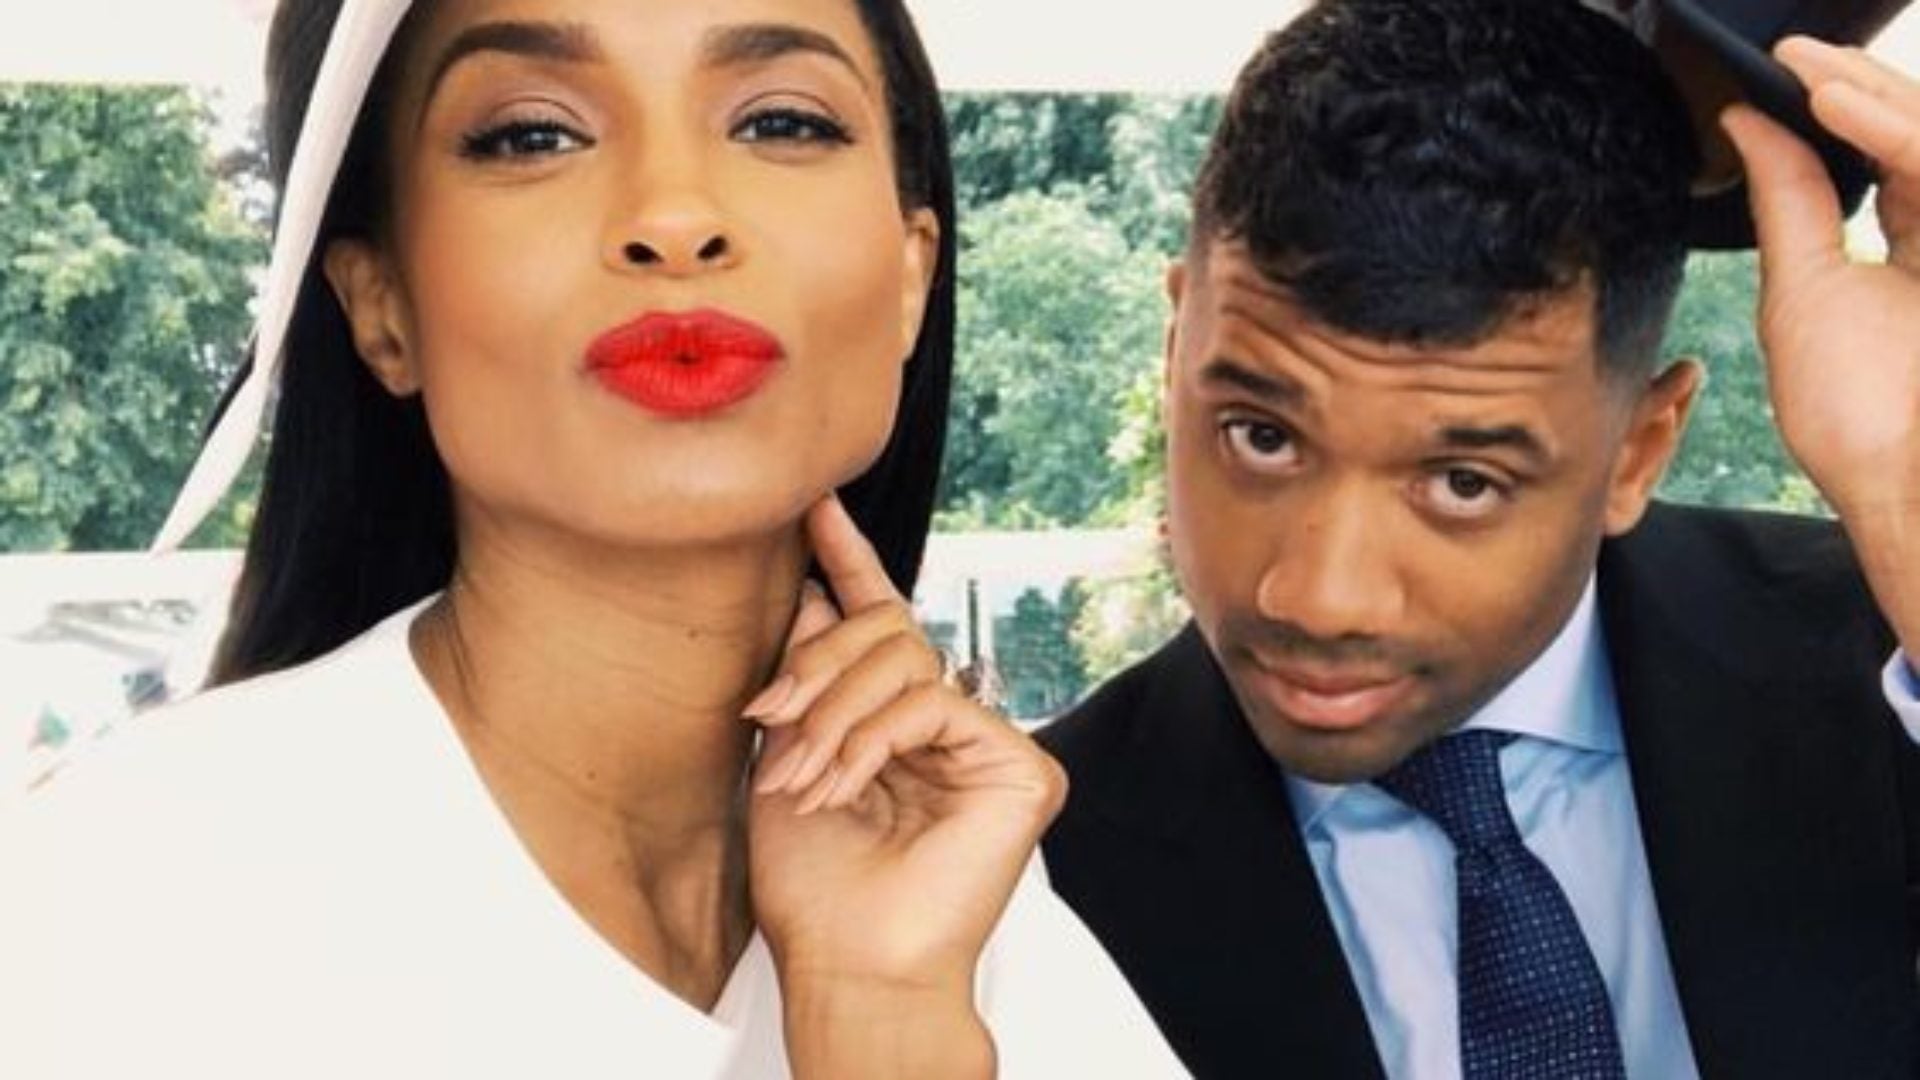 MUST SEE: Ciara Braids Russell Wilson's Hair For Easter